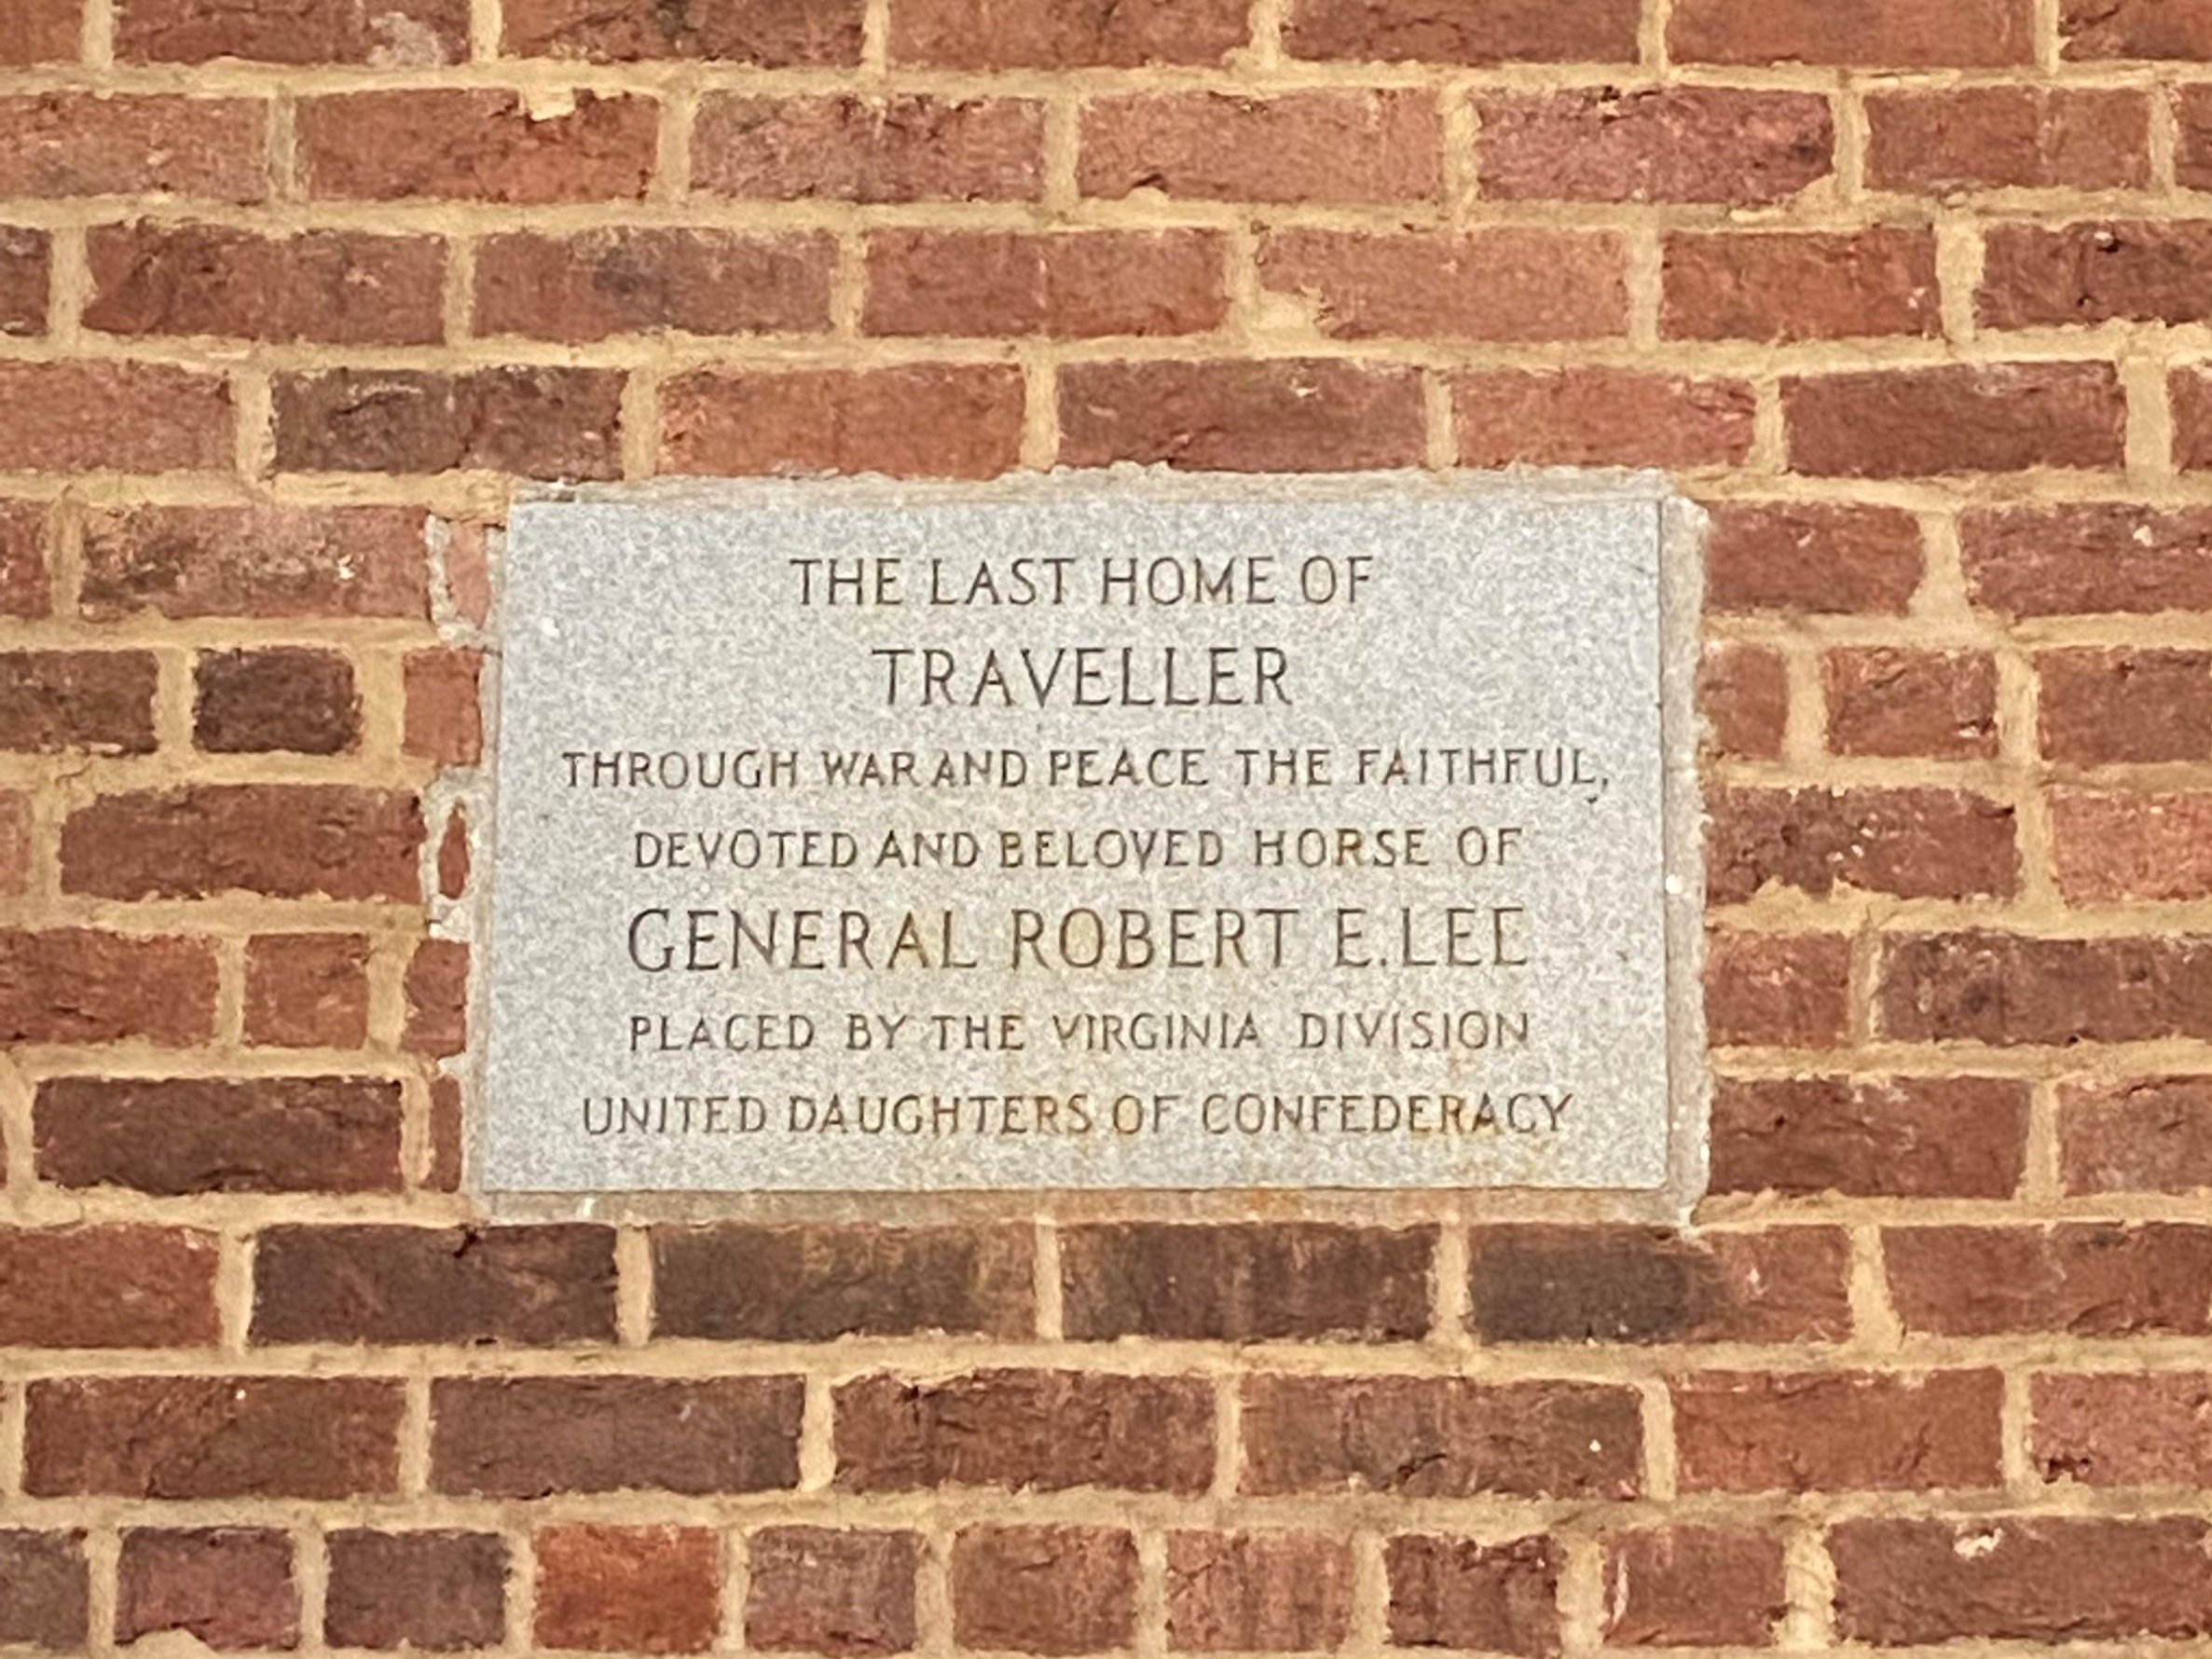   Traveller Plaque on stables (erected 1930). Photo by author.  